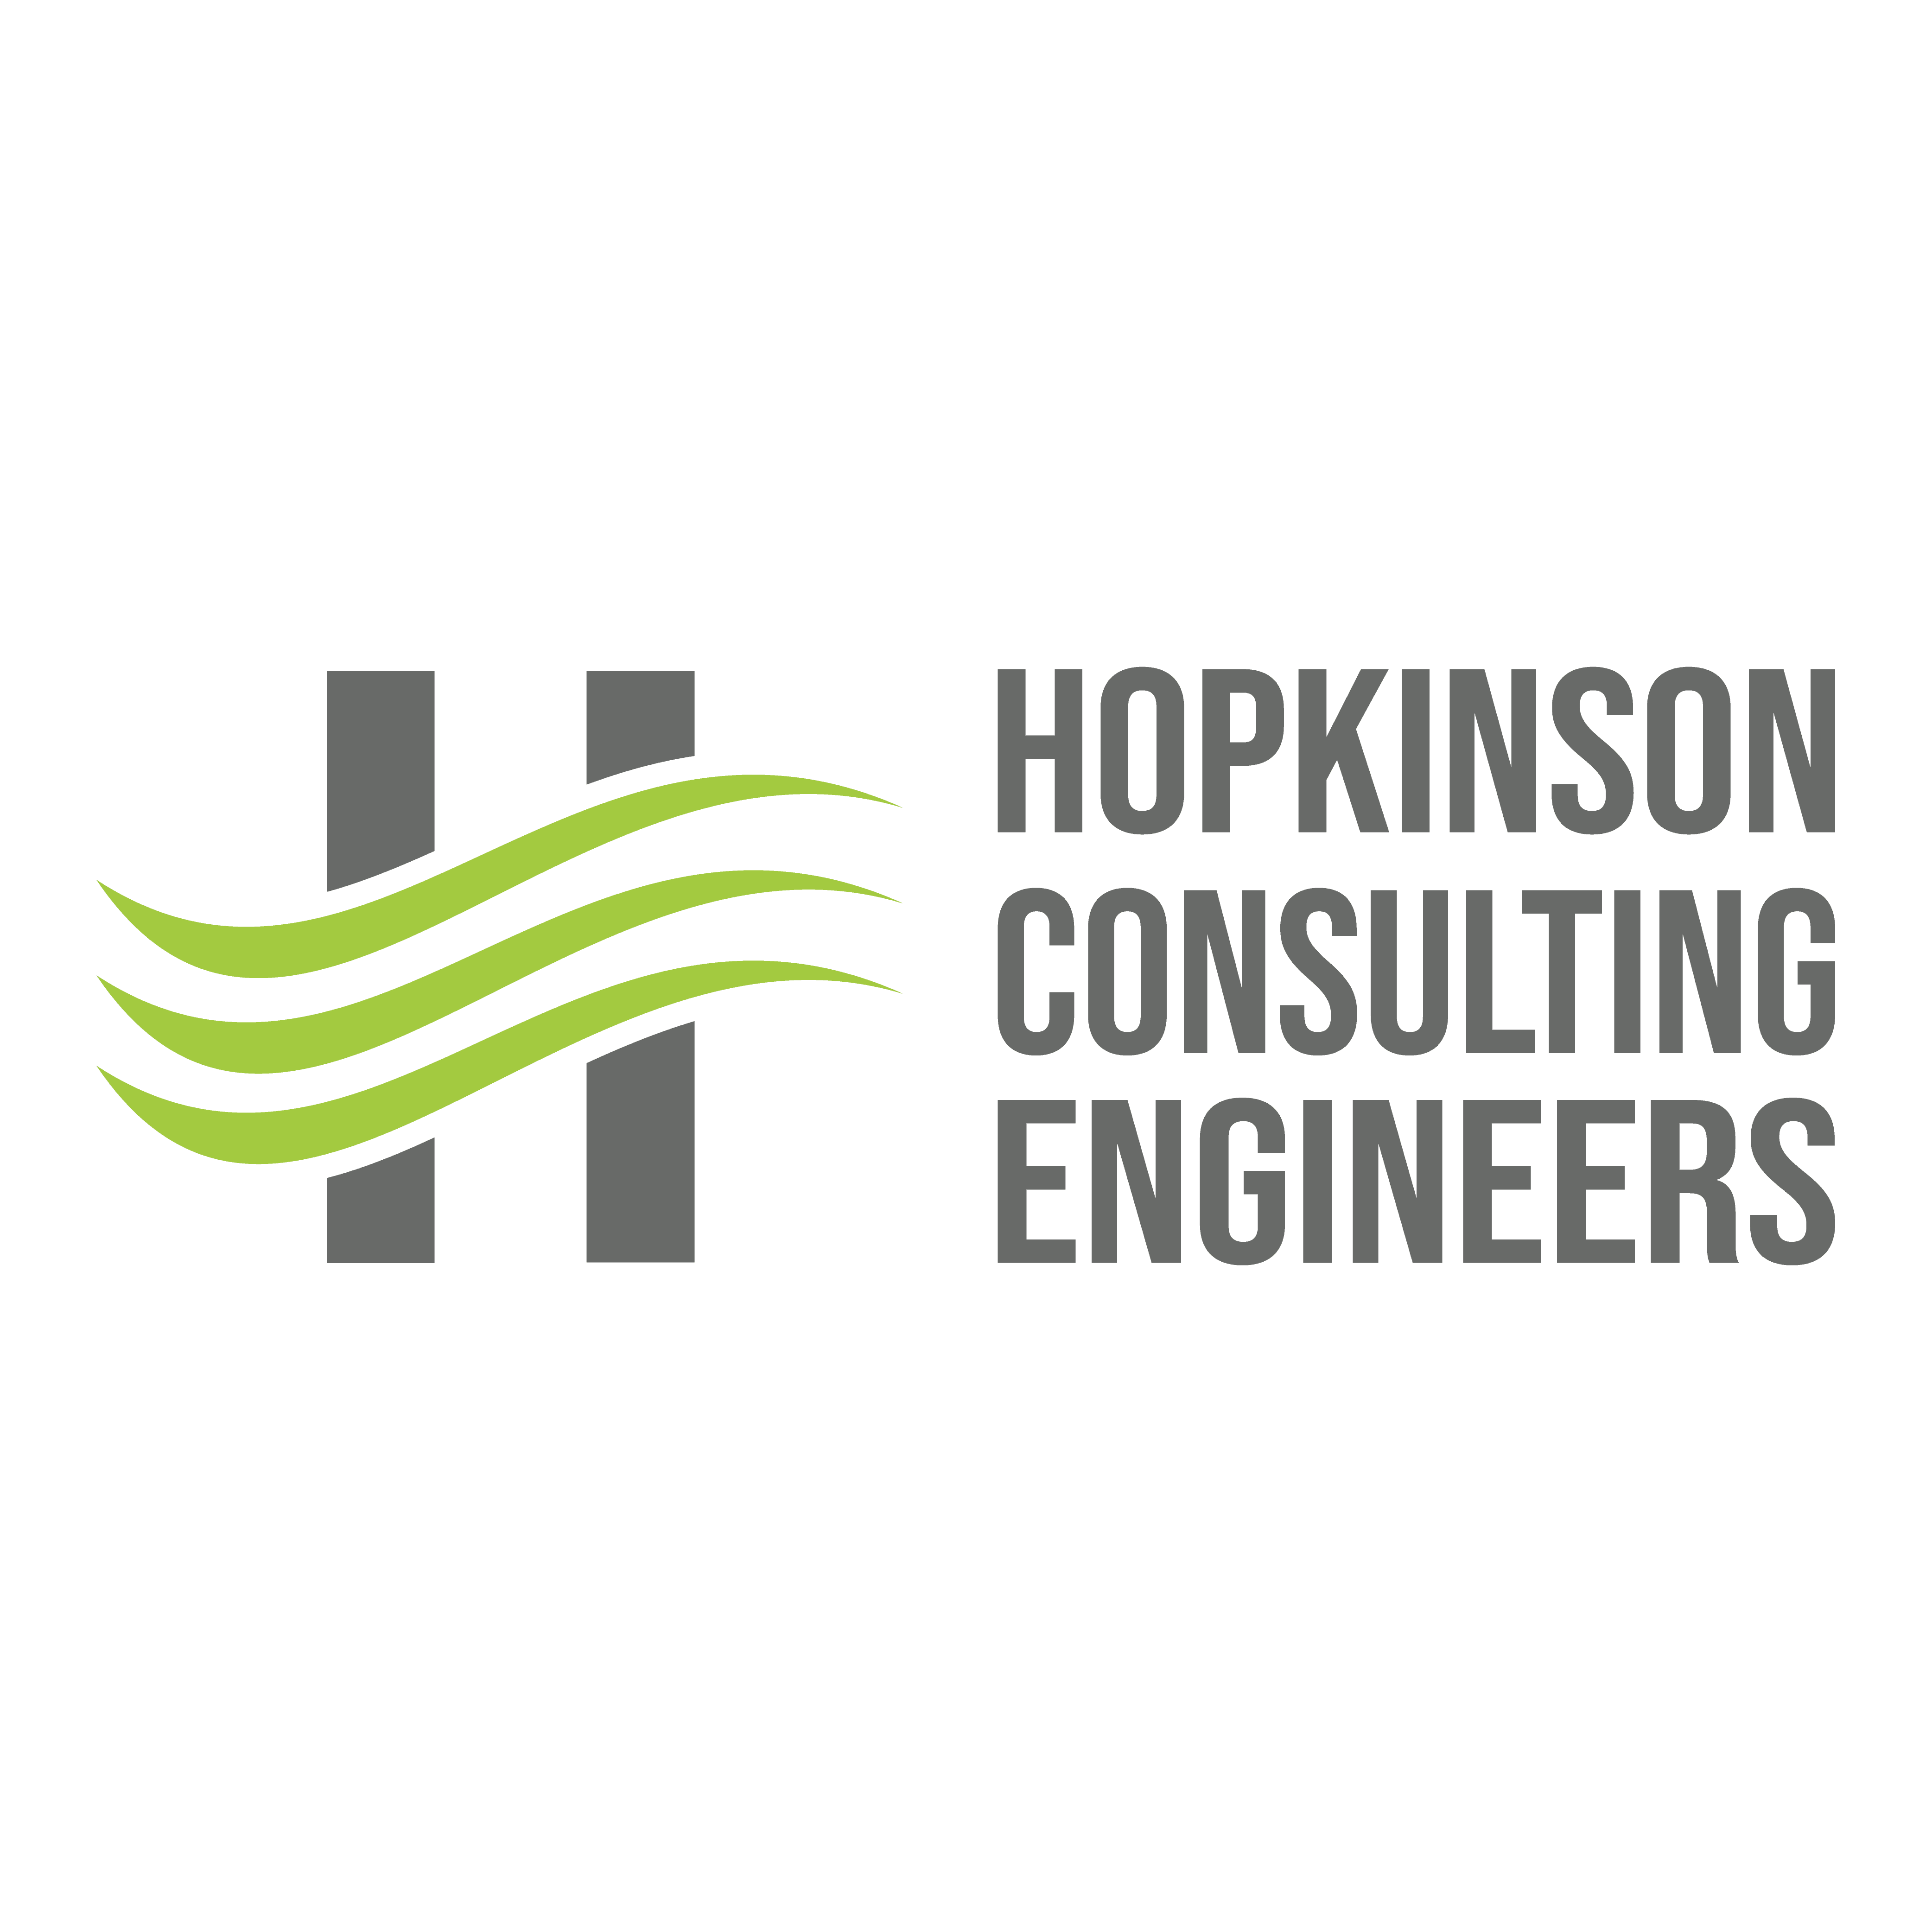 Hopkinson Consulting Engineers